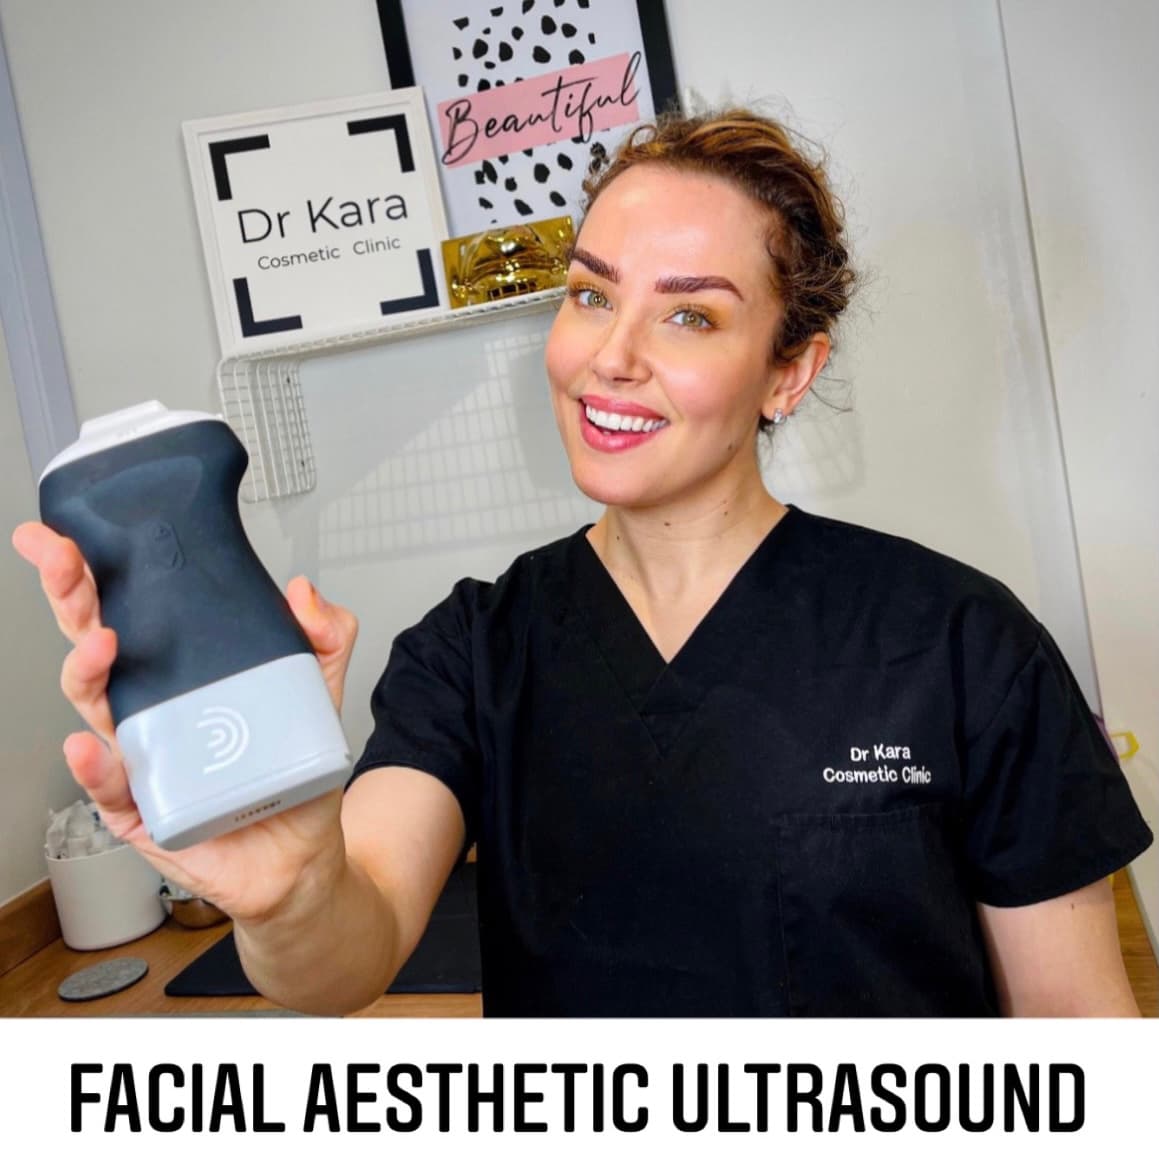 Facial Aesthetic Ultrasound by Dr Kara Cosmetic Clinic , Norwich, Uk